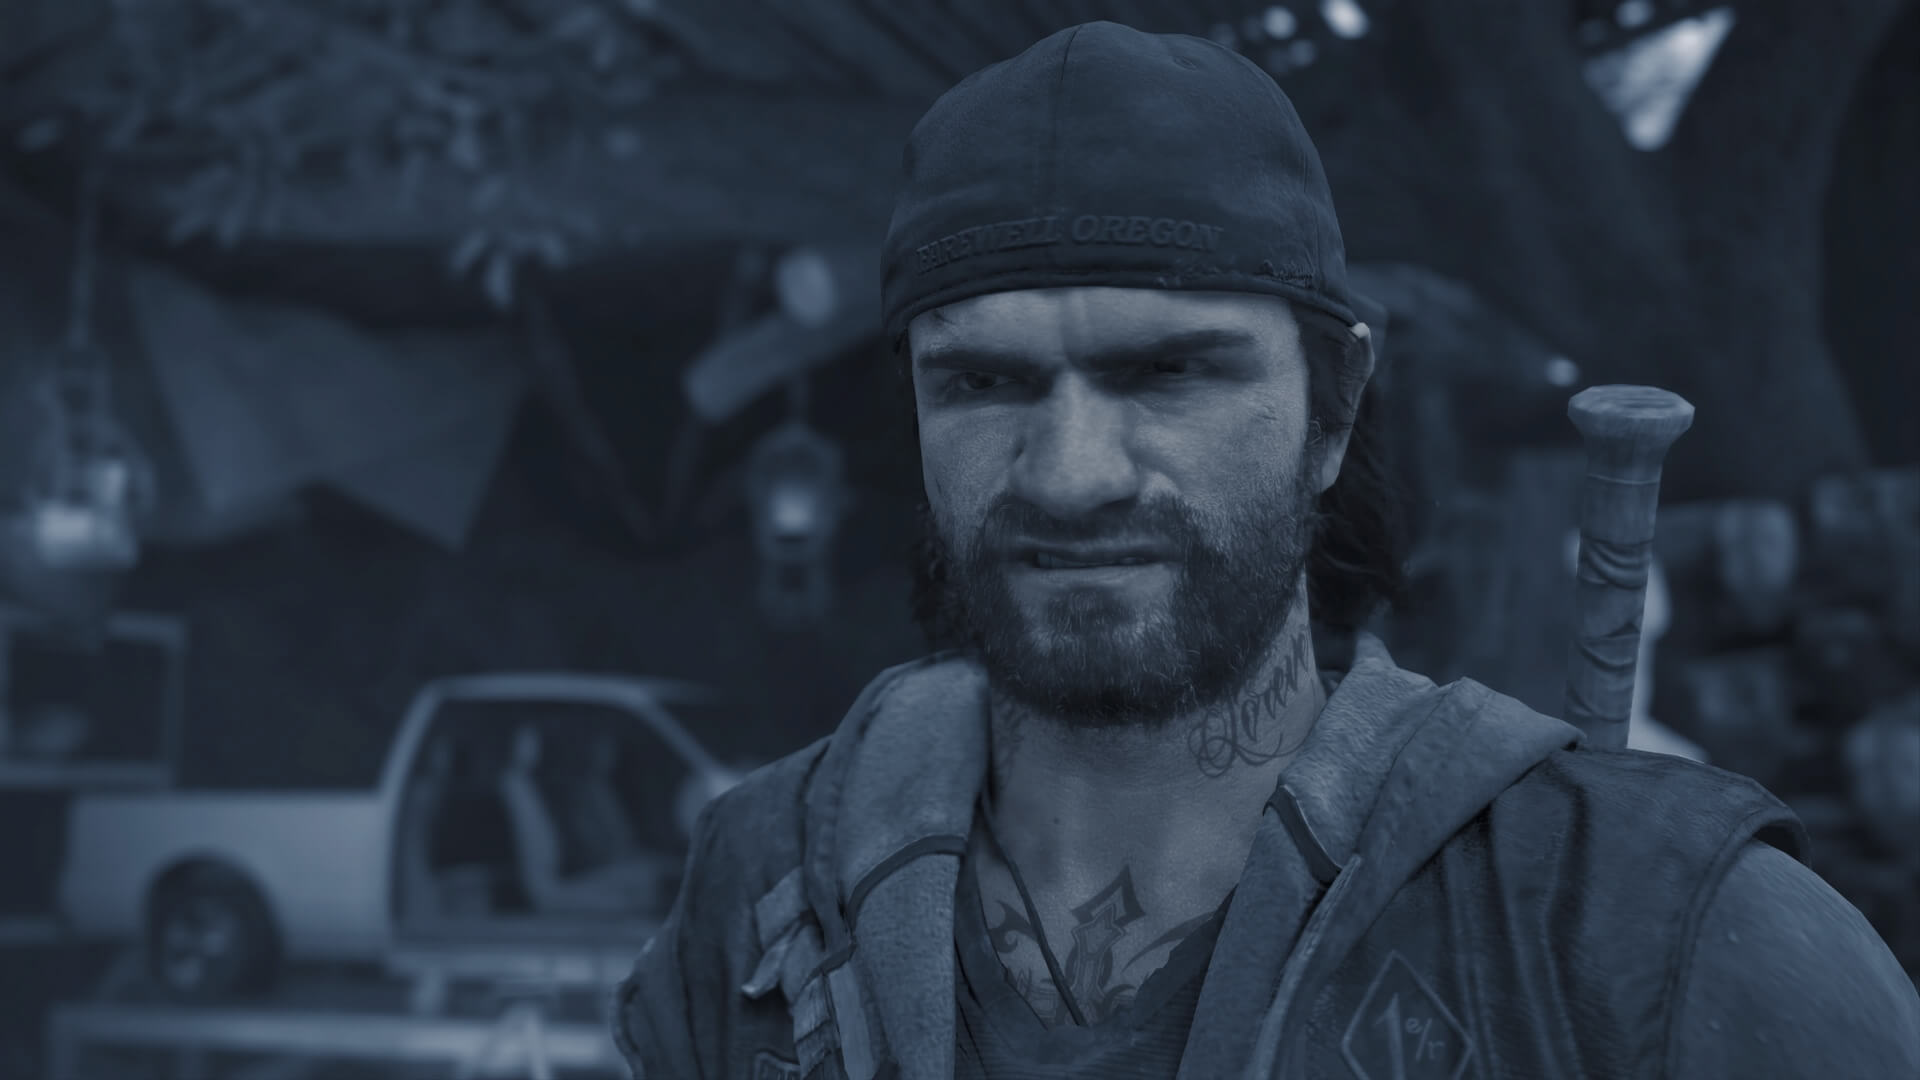 a close up of Days Gone main protagonist Decon St John. He has a growling look on his face and is carrying a baseball bat on his back